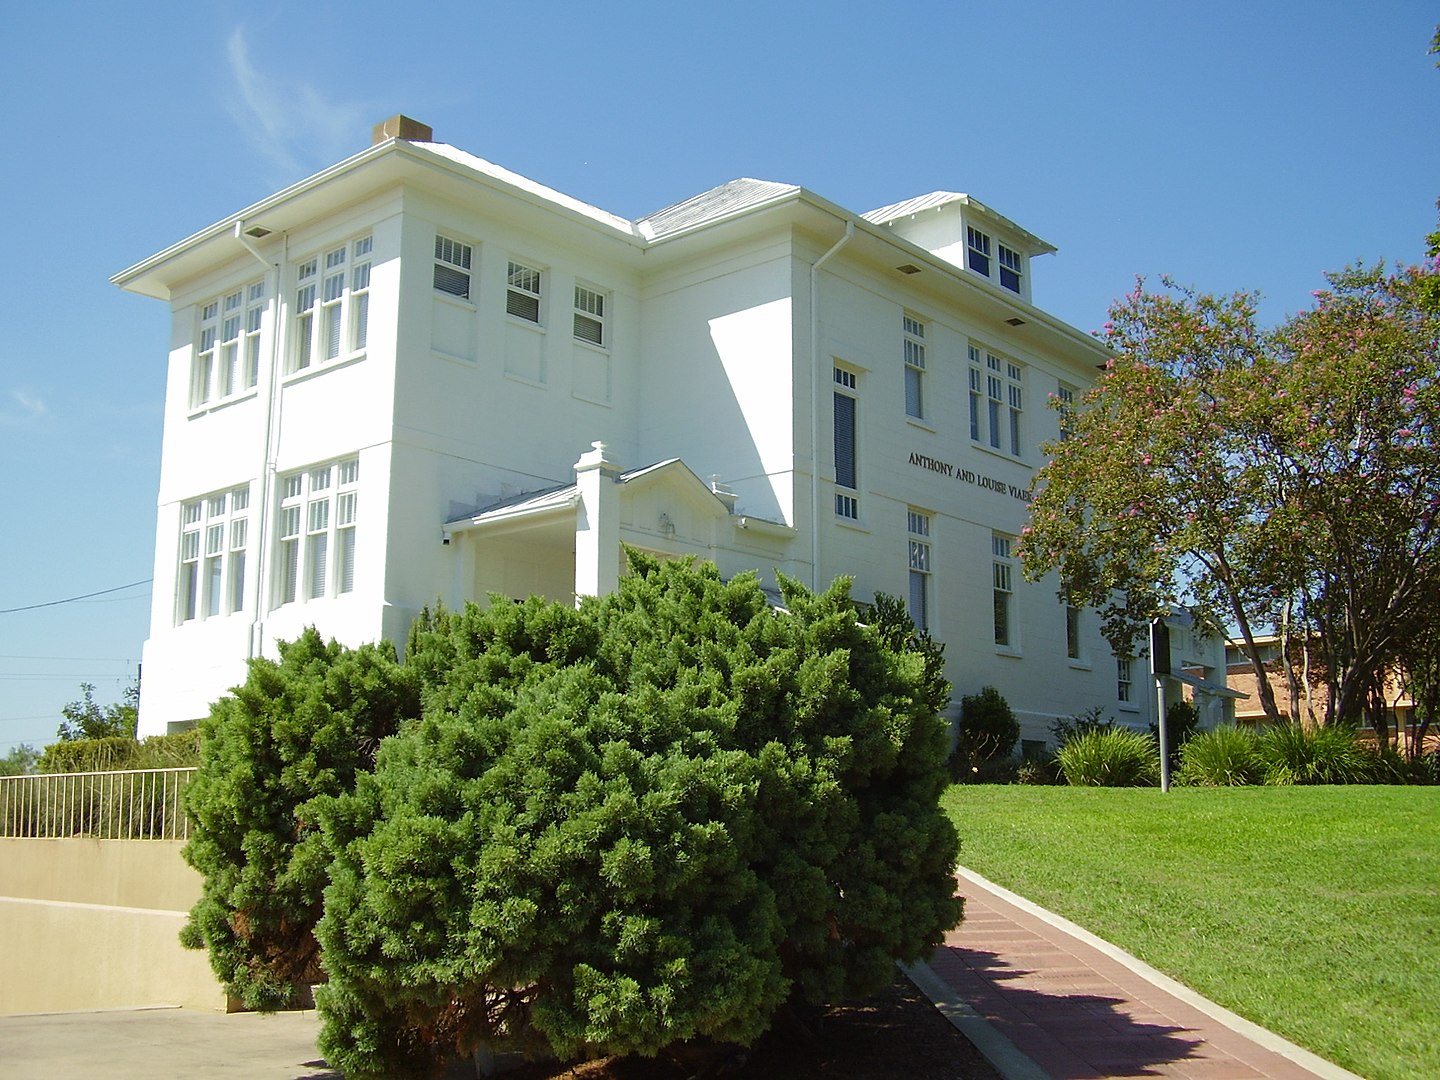 Anthony and Louise Viaer Alumni Hall, or the Administration Building as it is known historically, at Huston-Tillotson University in Austin, Texas.